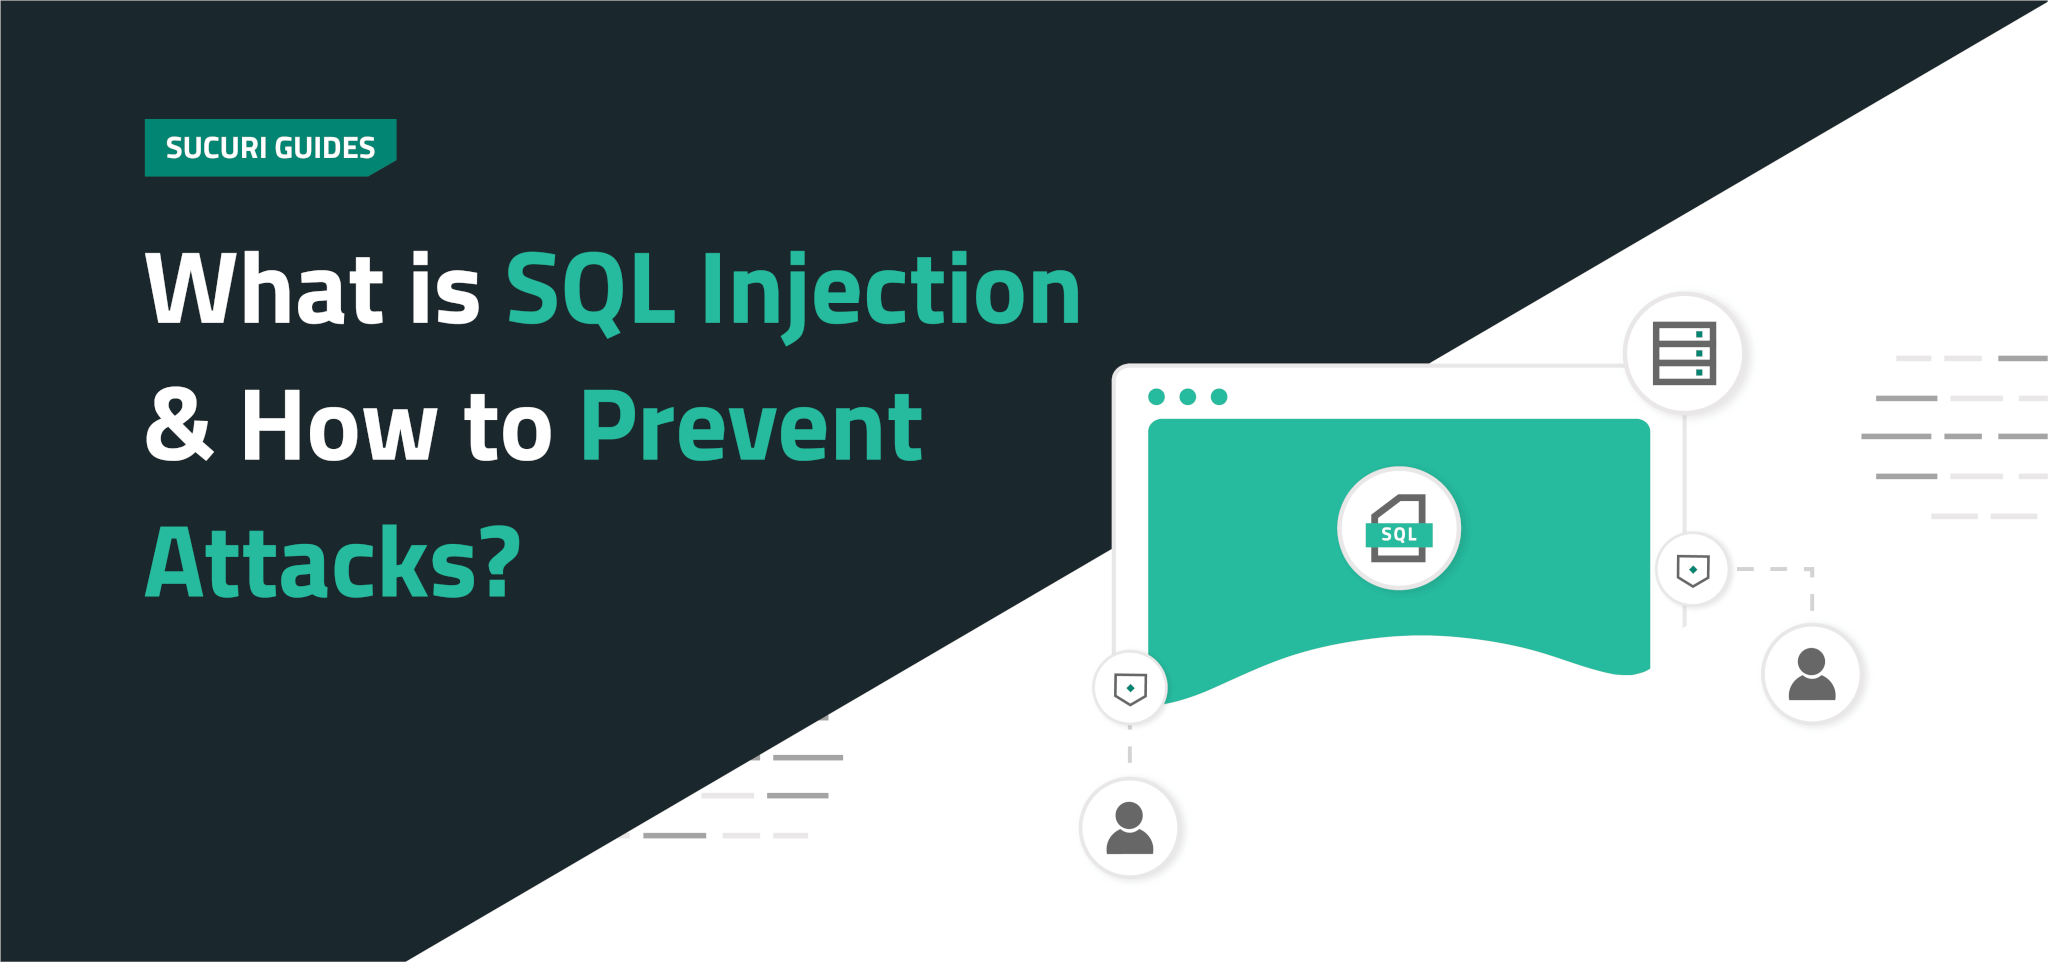 What are Injection attacks, and how to prevent them?